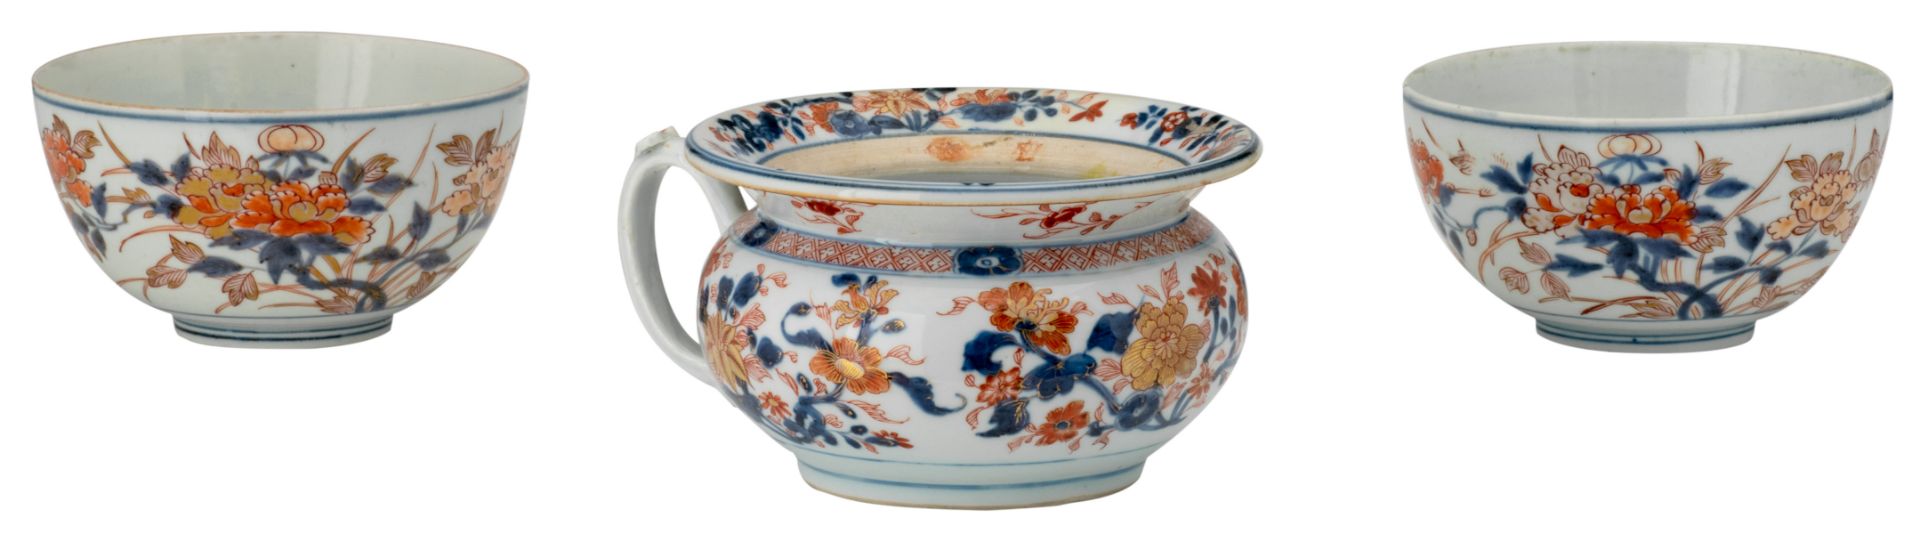 A lot of a Chinese Imari chamber pot and two bowls, decorated with flower branches, ca. 1740 - 1750,